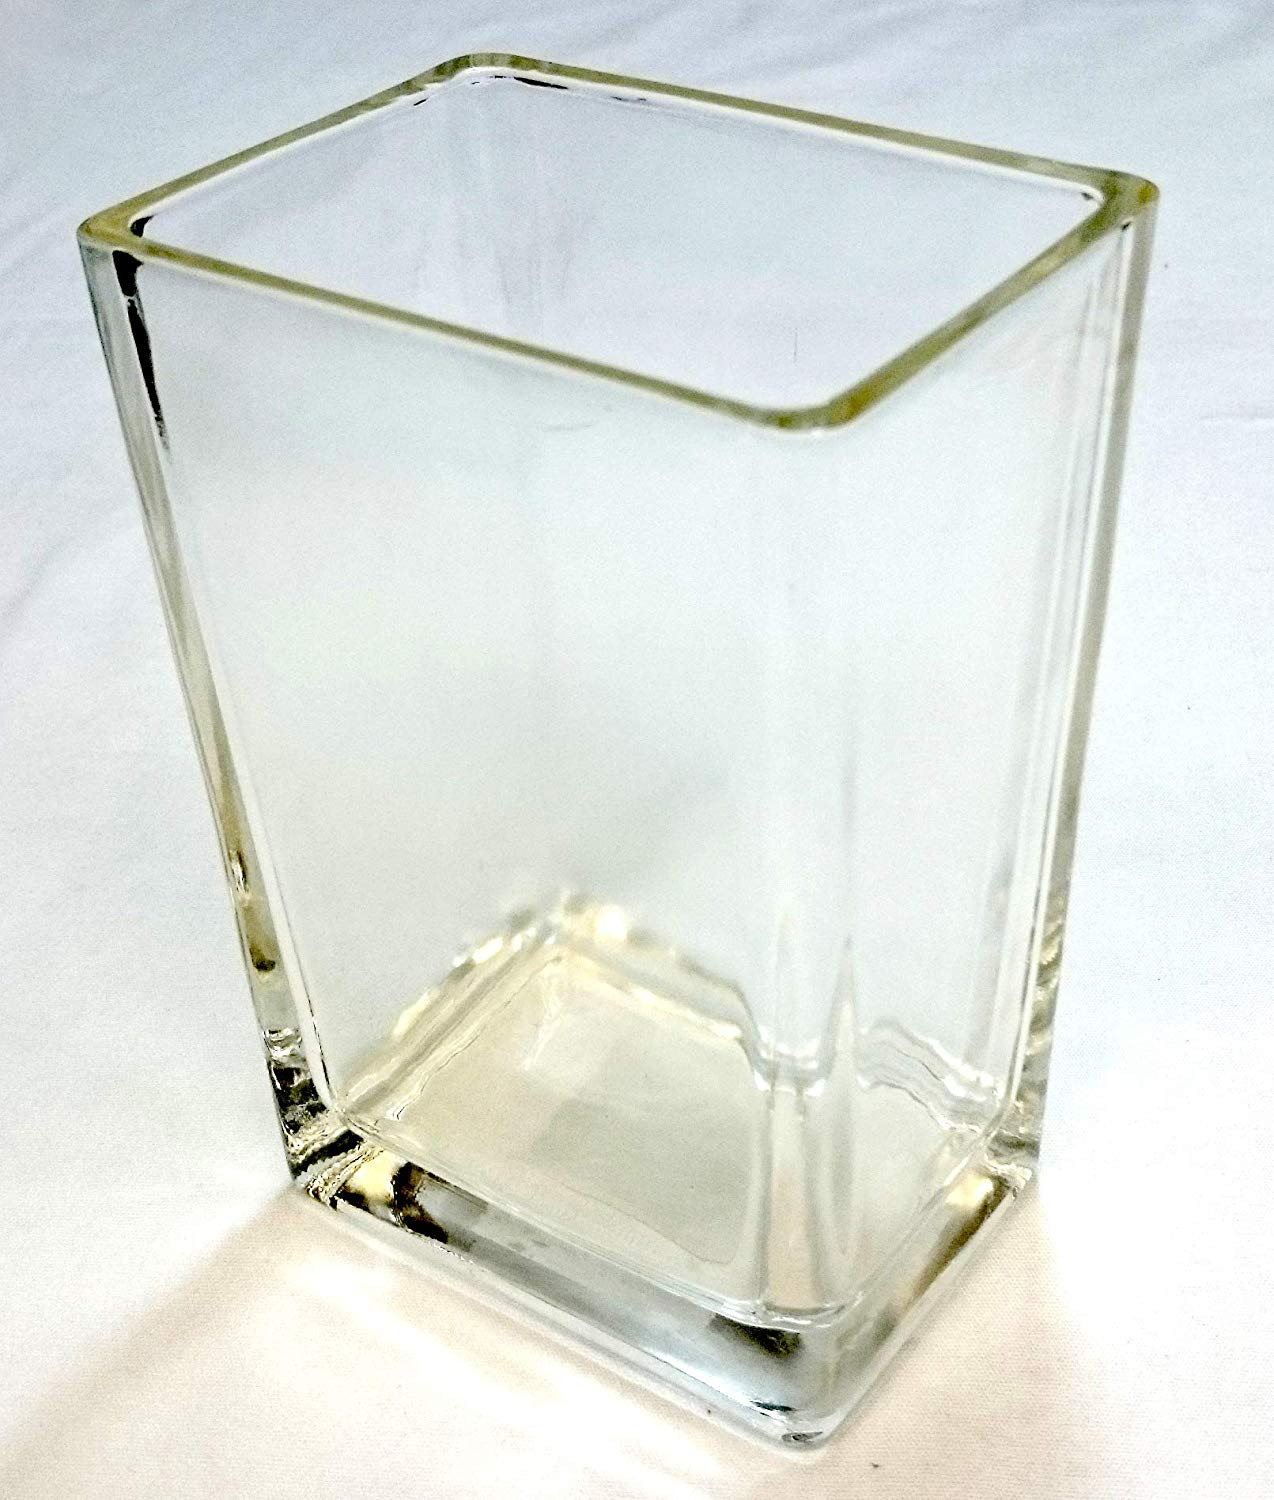 6x6 cylinder vase of amazon com concord global trading 6 rectangle 3x4 base glass vase within amazon com concord global trading 6 rectangle 3x4 base glass vase six inch high tapered clear pillar centerpiece 6x4x3 candleholder home kitchen